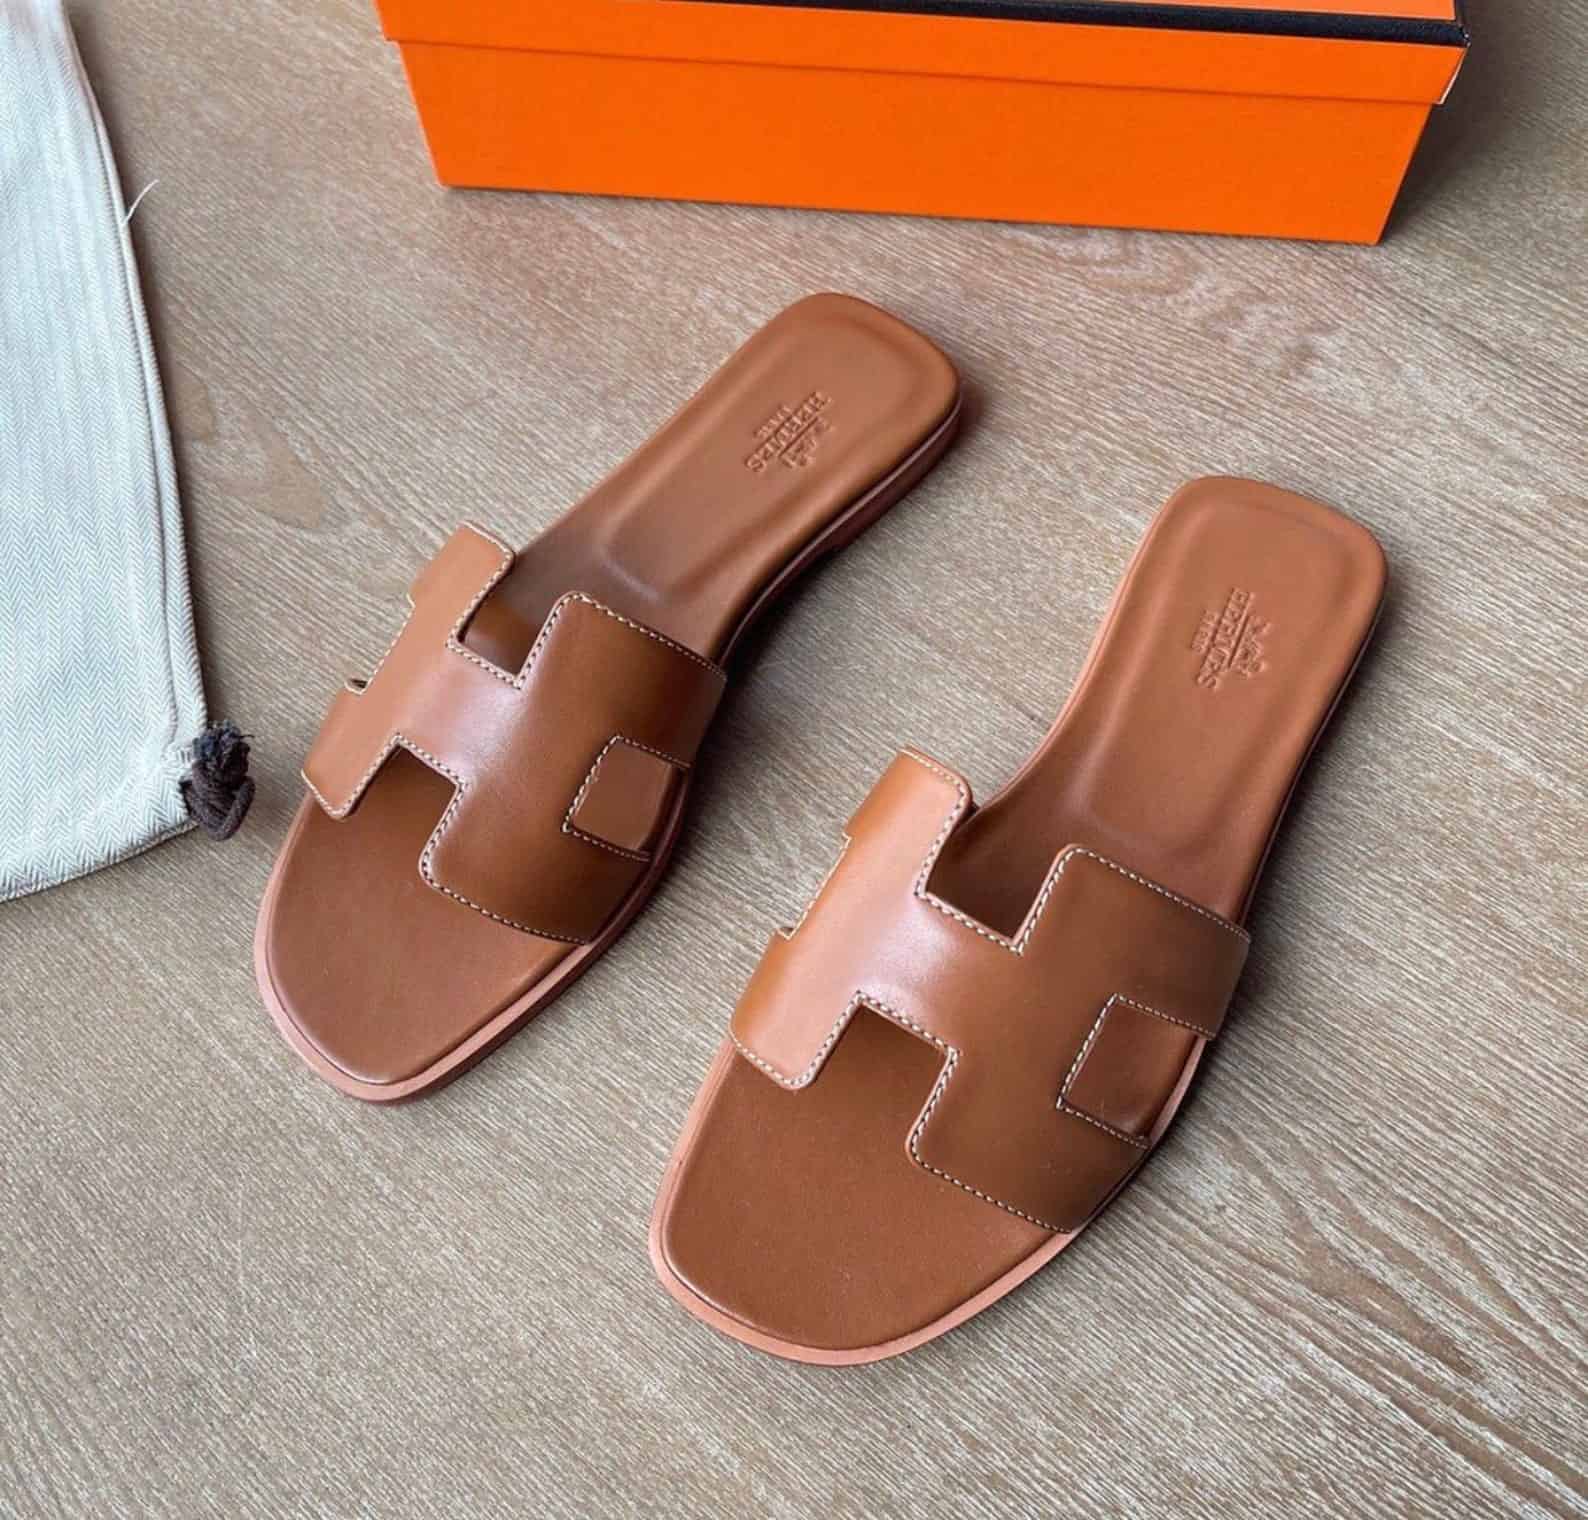 image of a brown leather sandal with an H cut-out shape on the top